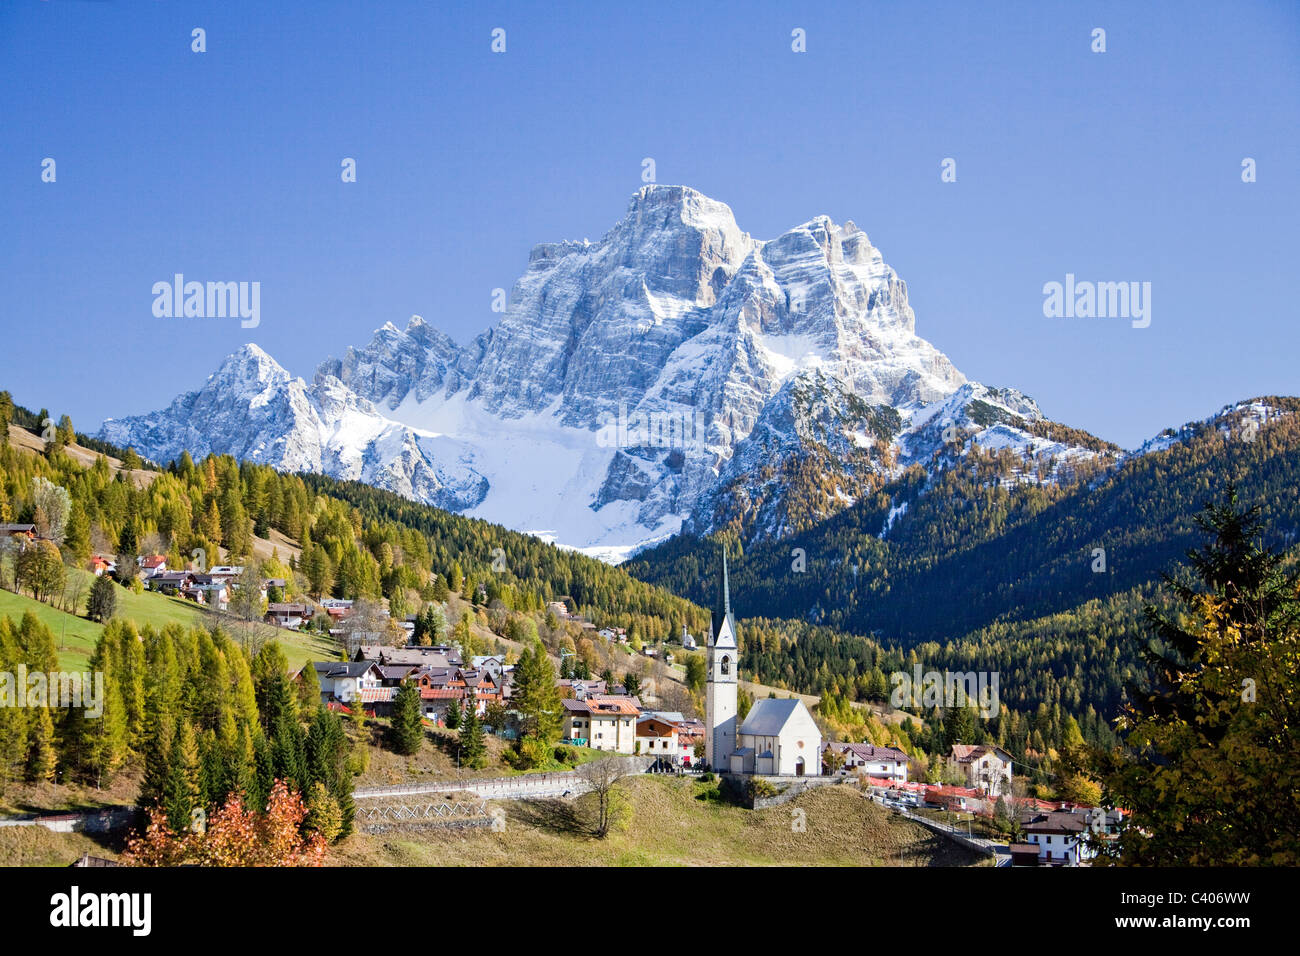 Italy, Europe, Dolomites, Alps, Selva di Cadore, Pelmo, mountains, wood, forest, autumn, UNESCO world cultural heritage Stock Photo